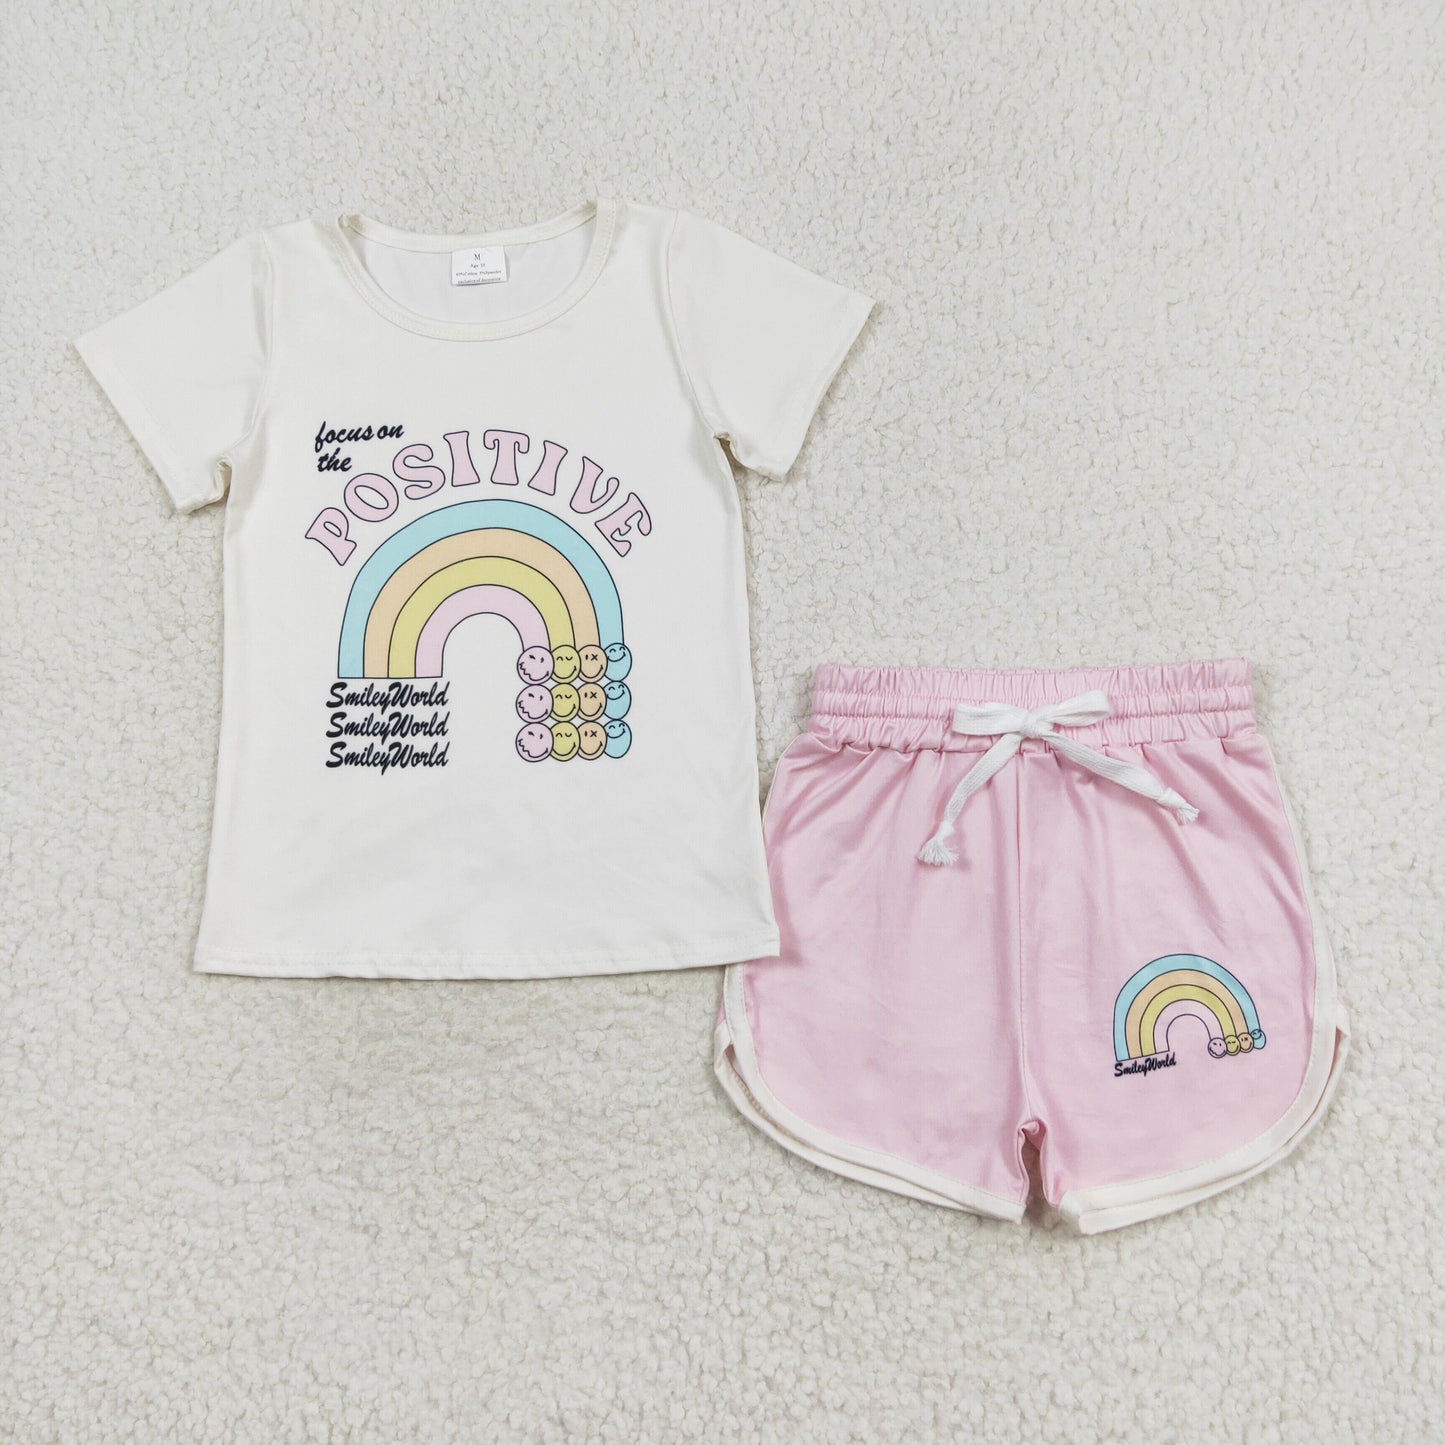 GSSO1175 Baby Girls Summer Positive Top Pink Shorts Outfit